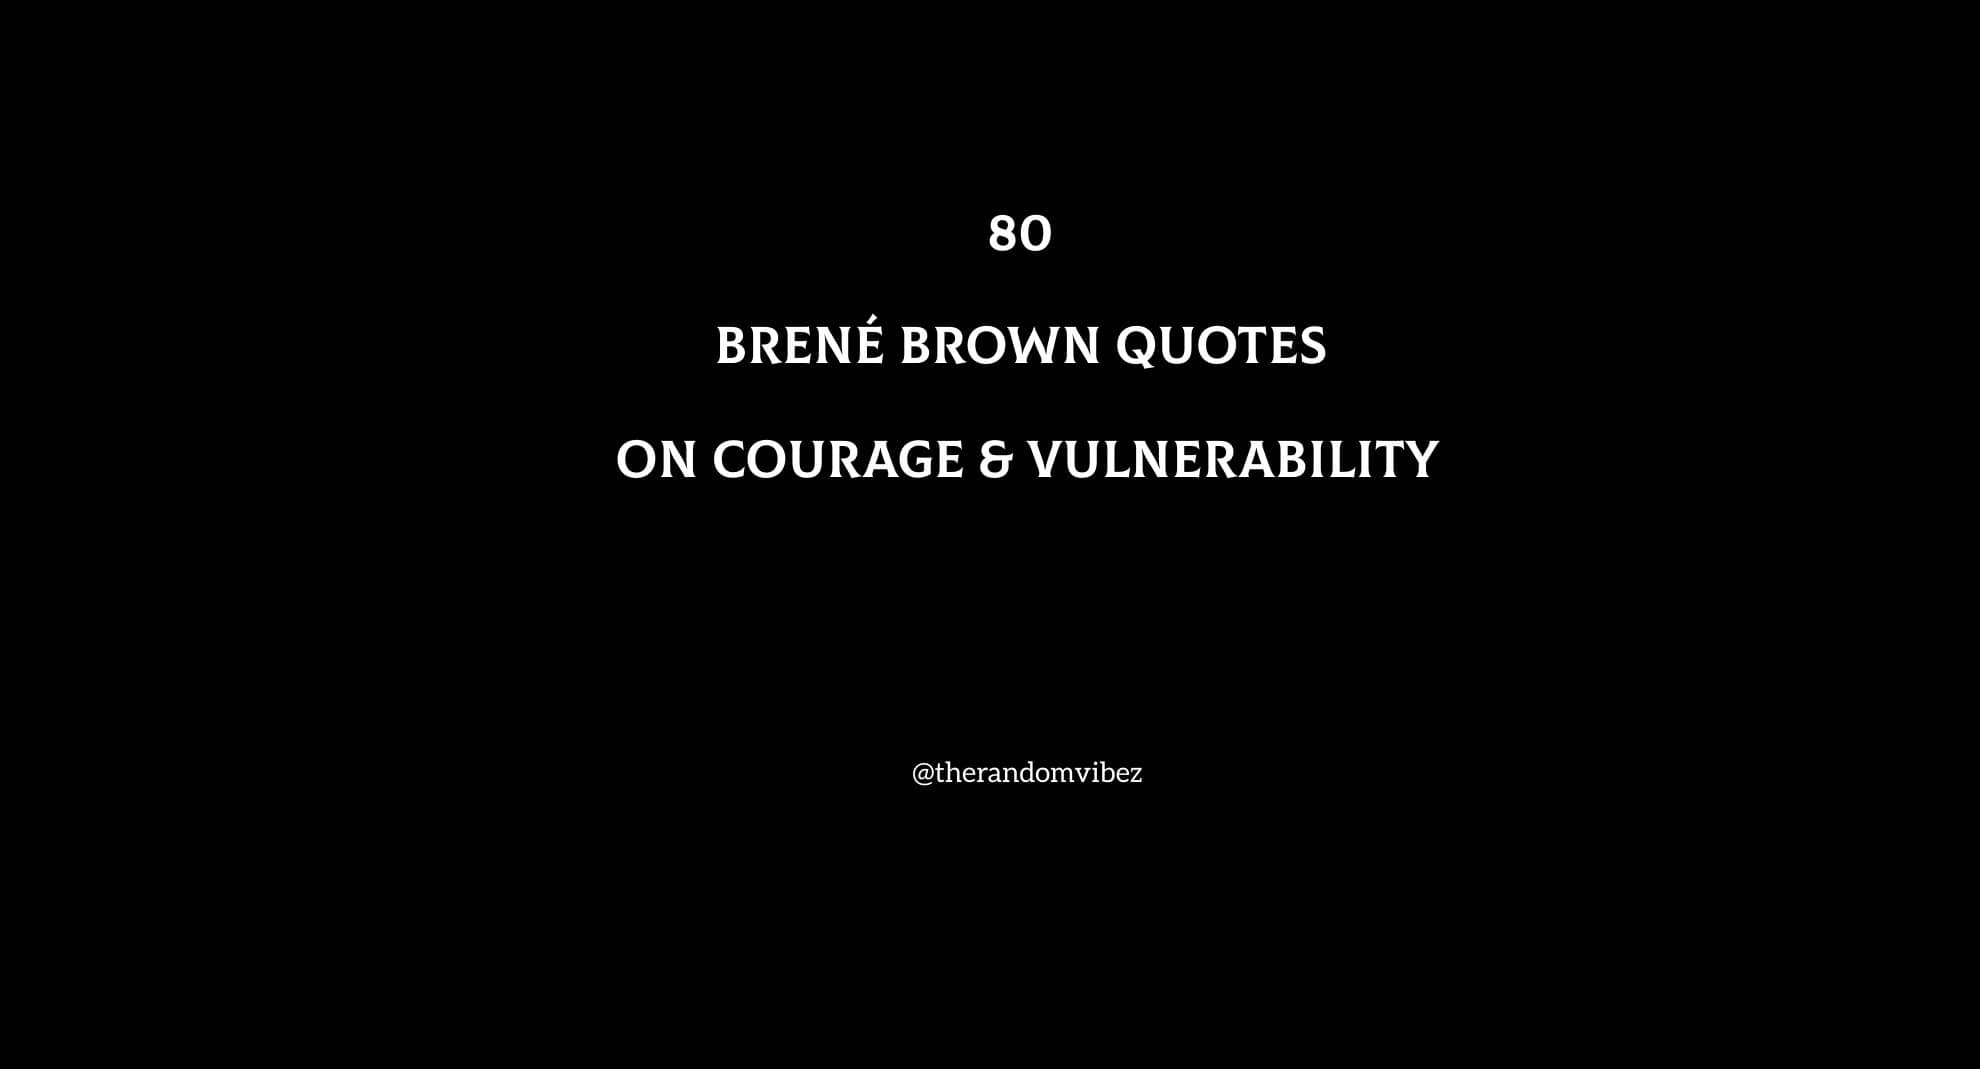 80 Brené Brown Quotes On Courage & Vulnerability